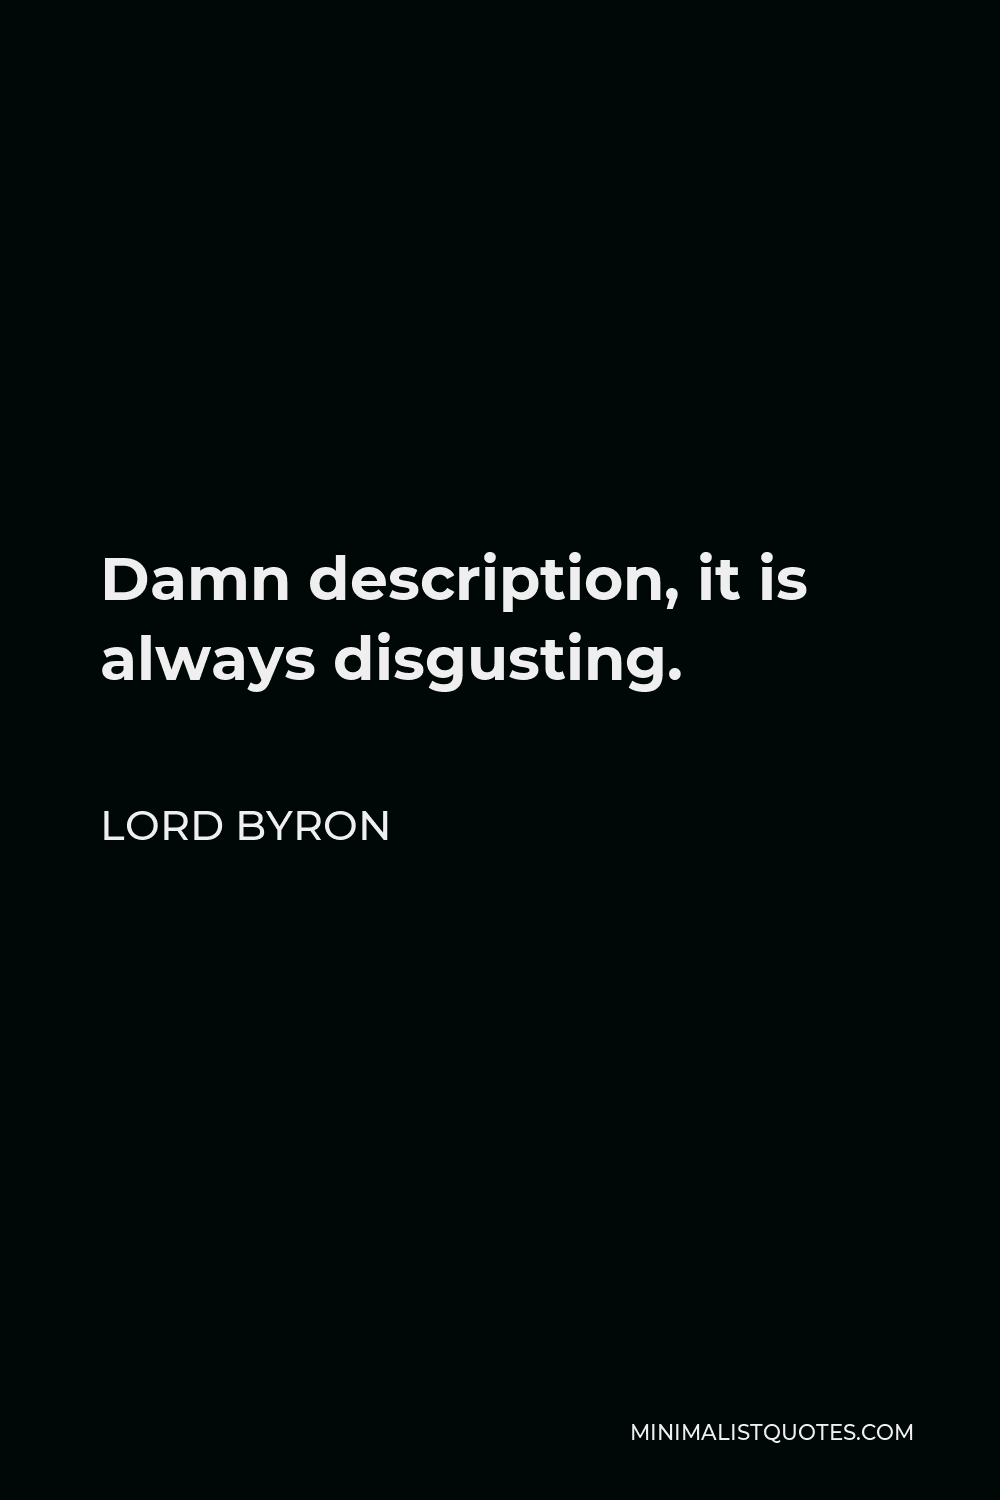 Lord Byron Quote - Damn description, it is always disgusting.